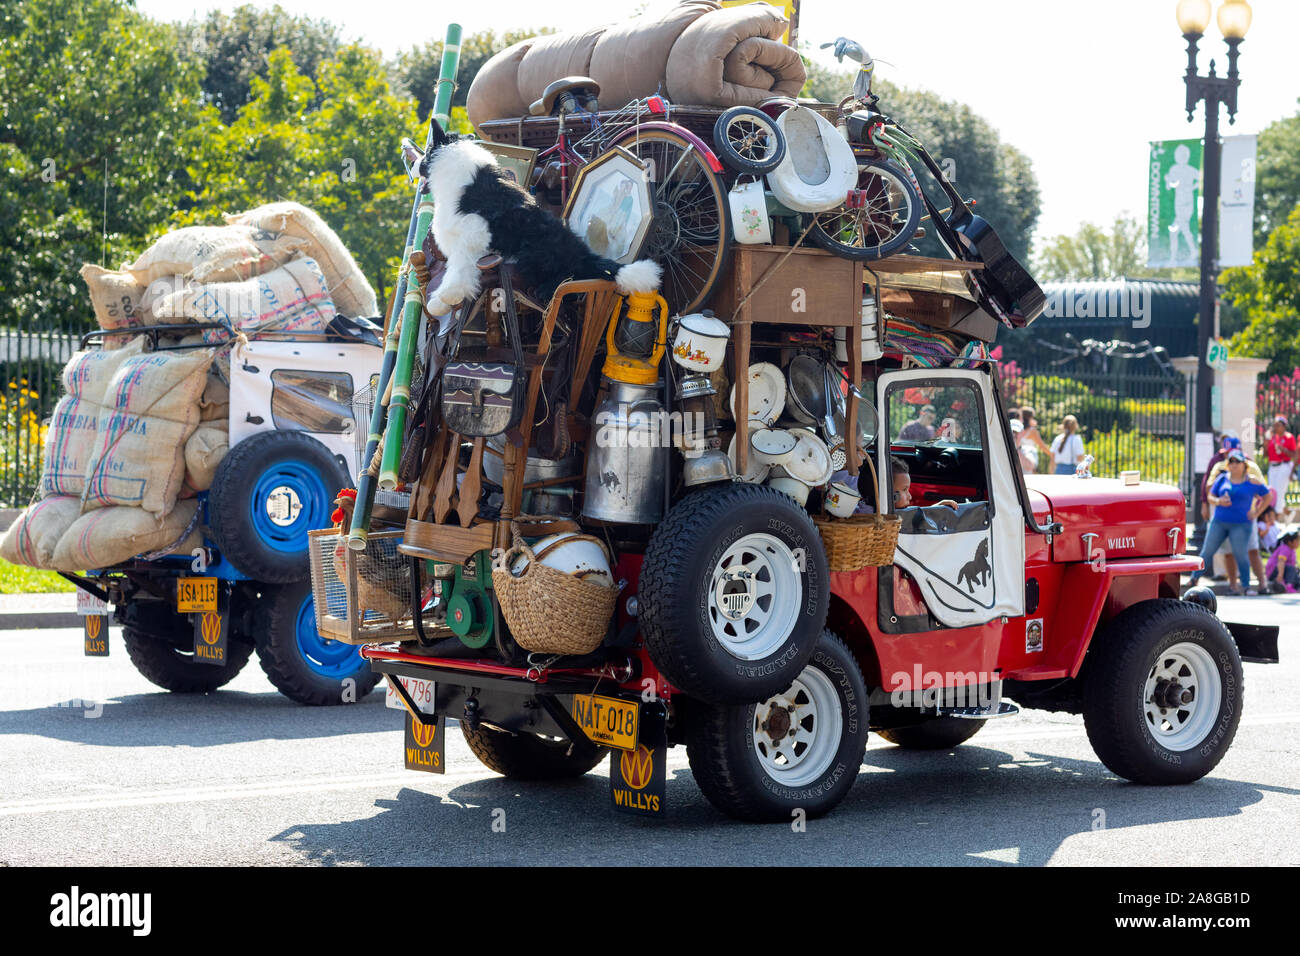 Washington DC, USA - September 21, 2019: The Fiesta DC, Willys jeeps, heavy loaded, going down constitution avenue, during the parade Stock Photo